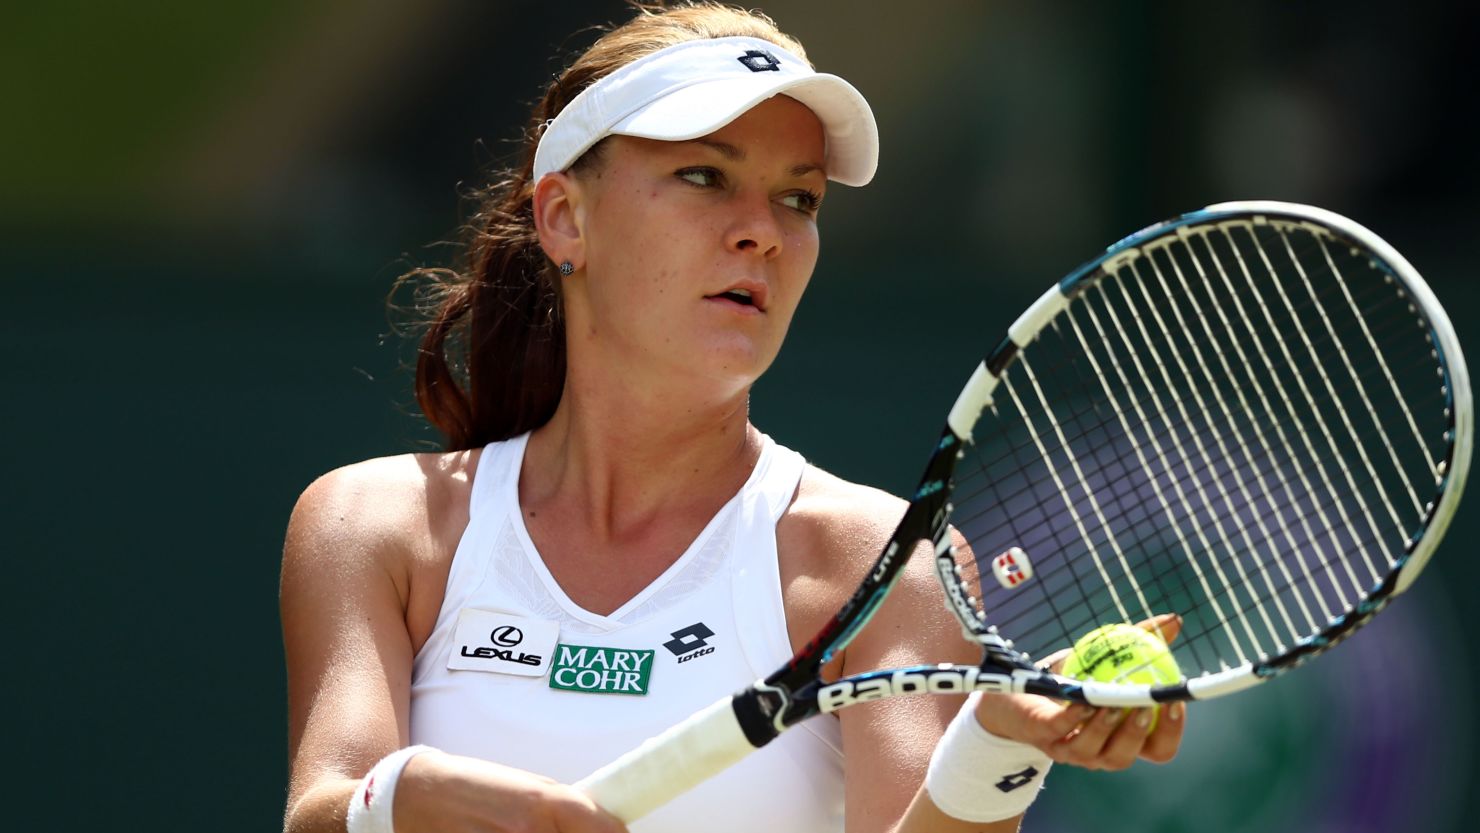 Agnieszka Radwanska will hope to round off an impressive year by winning the WTA Championships in October.